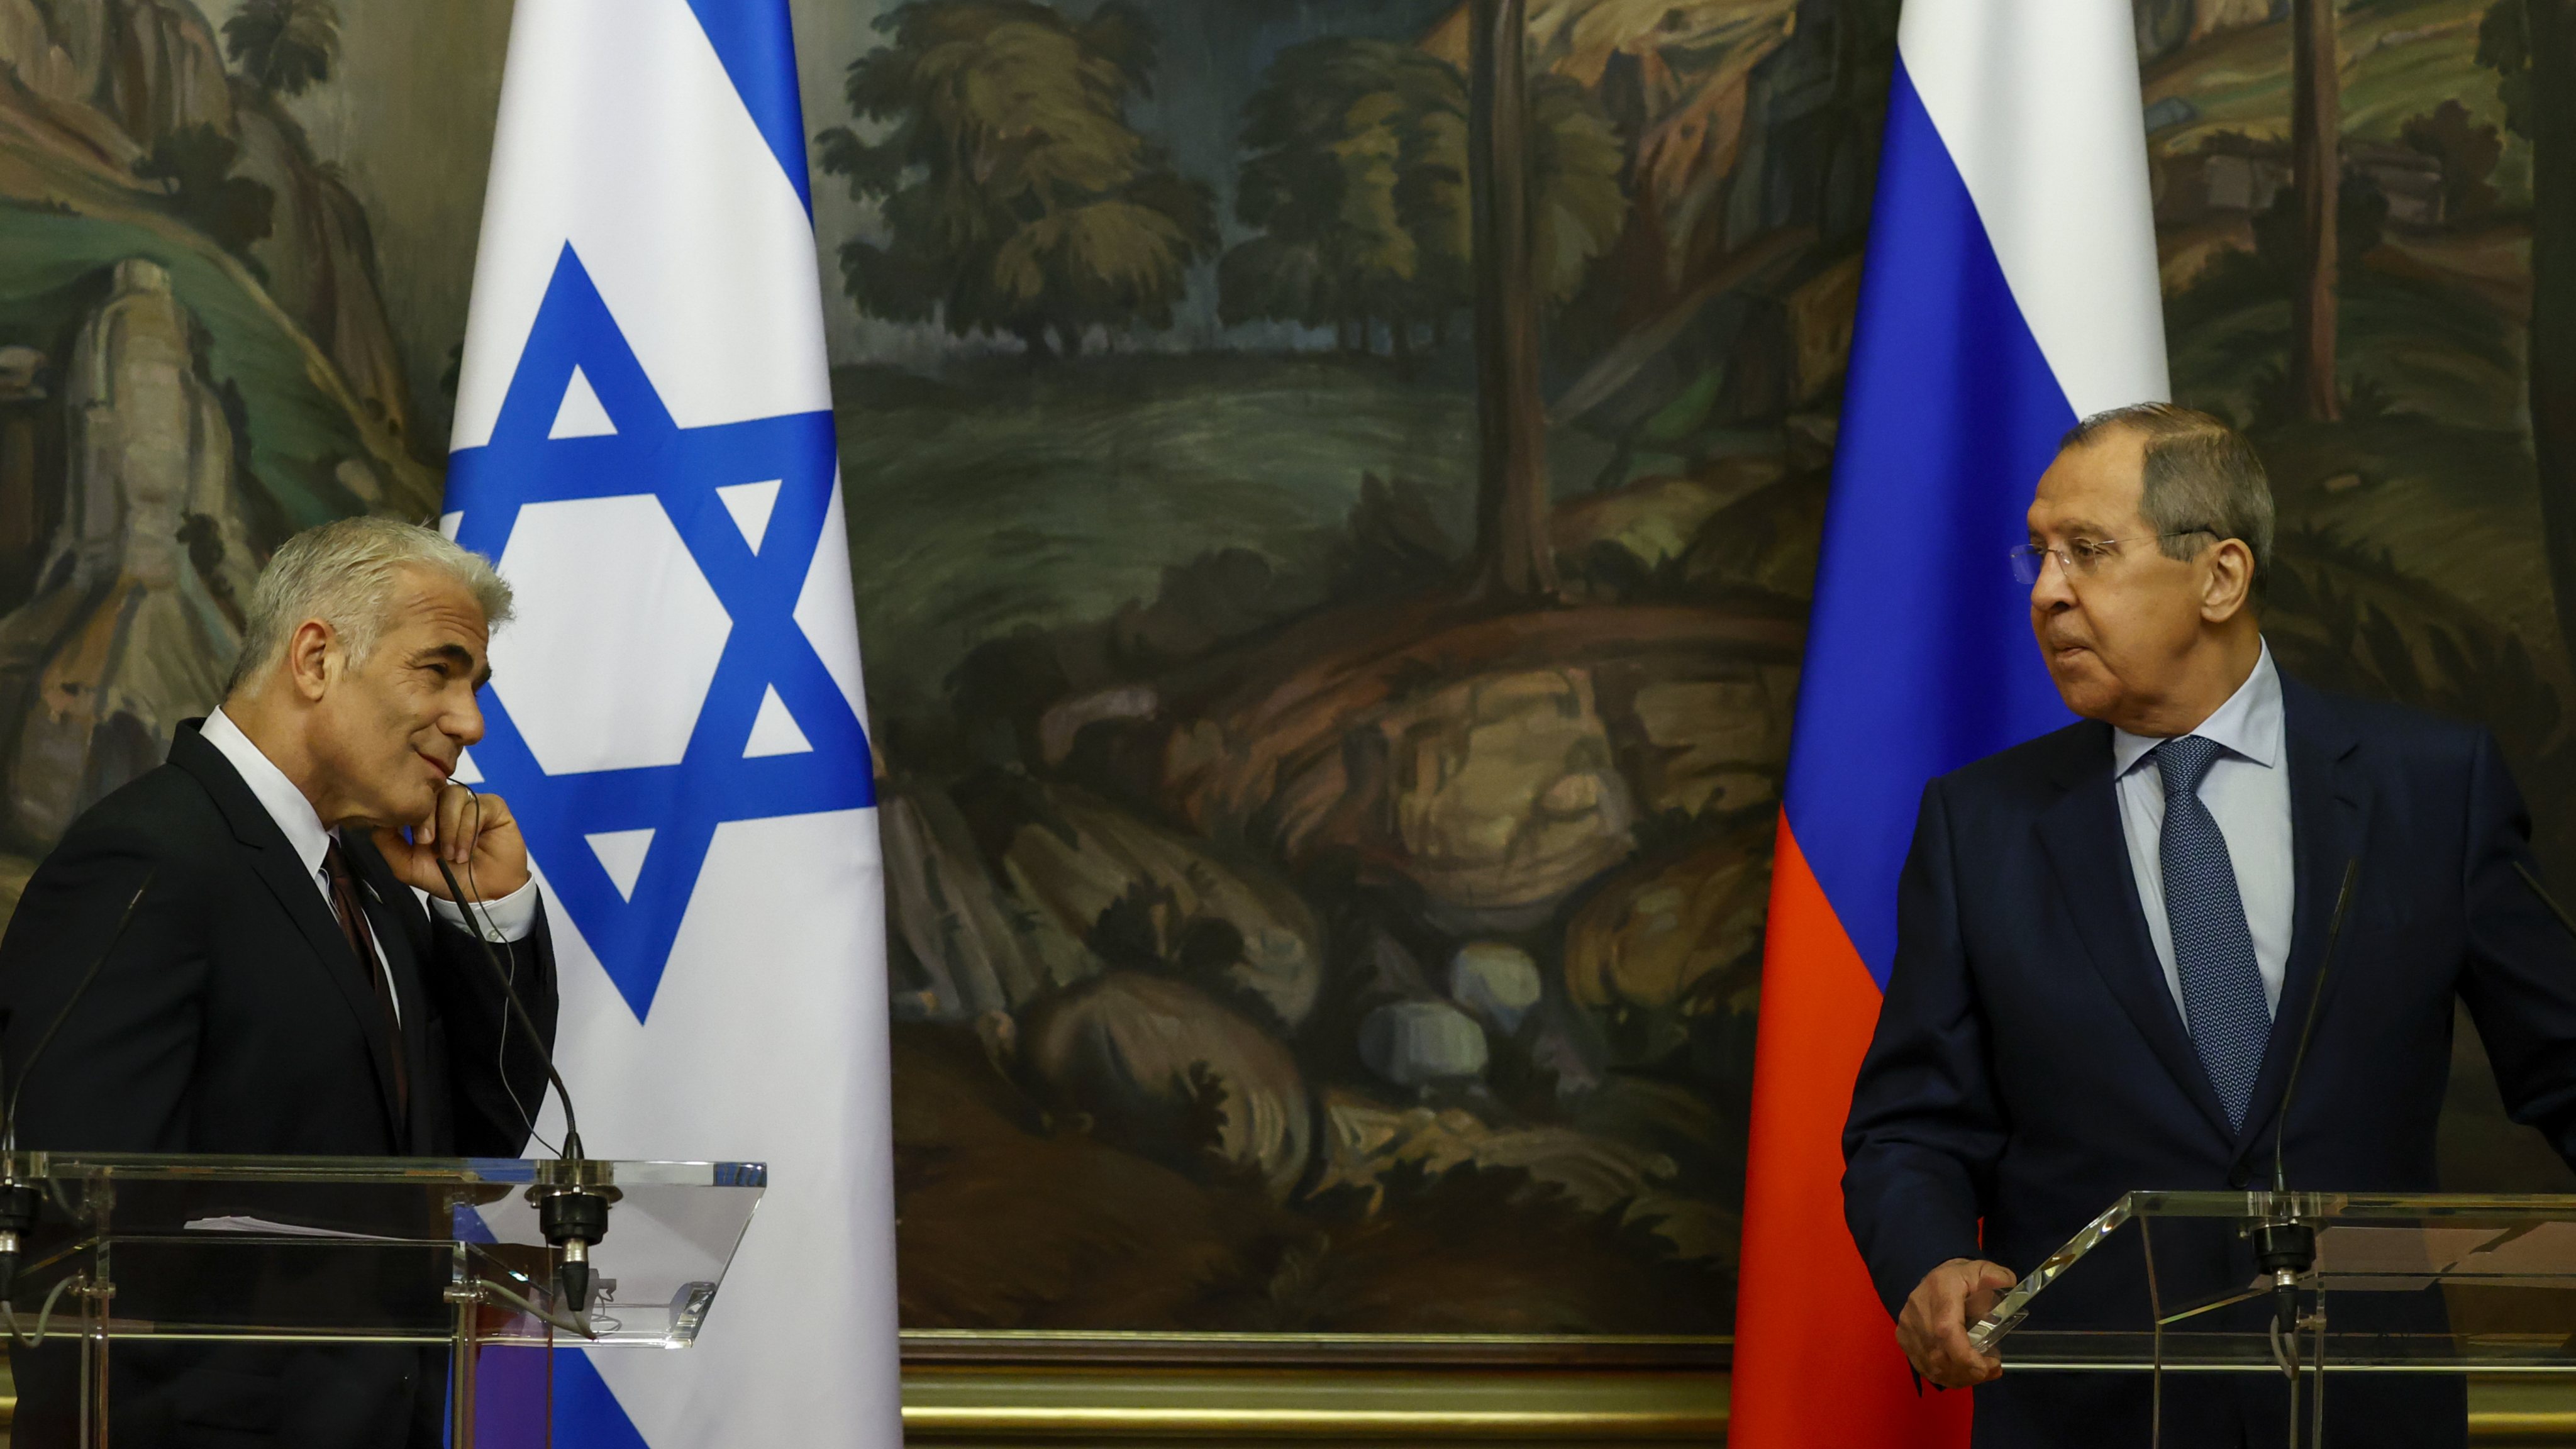 Foreign Ministers of Russia and Israel meet in Moscow